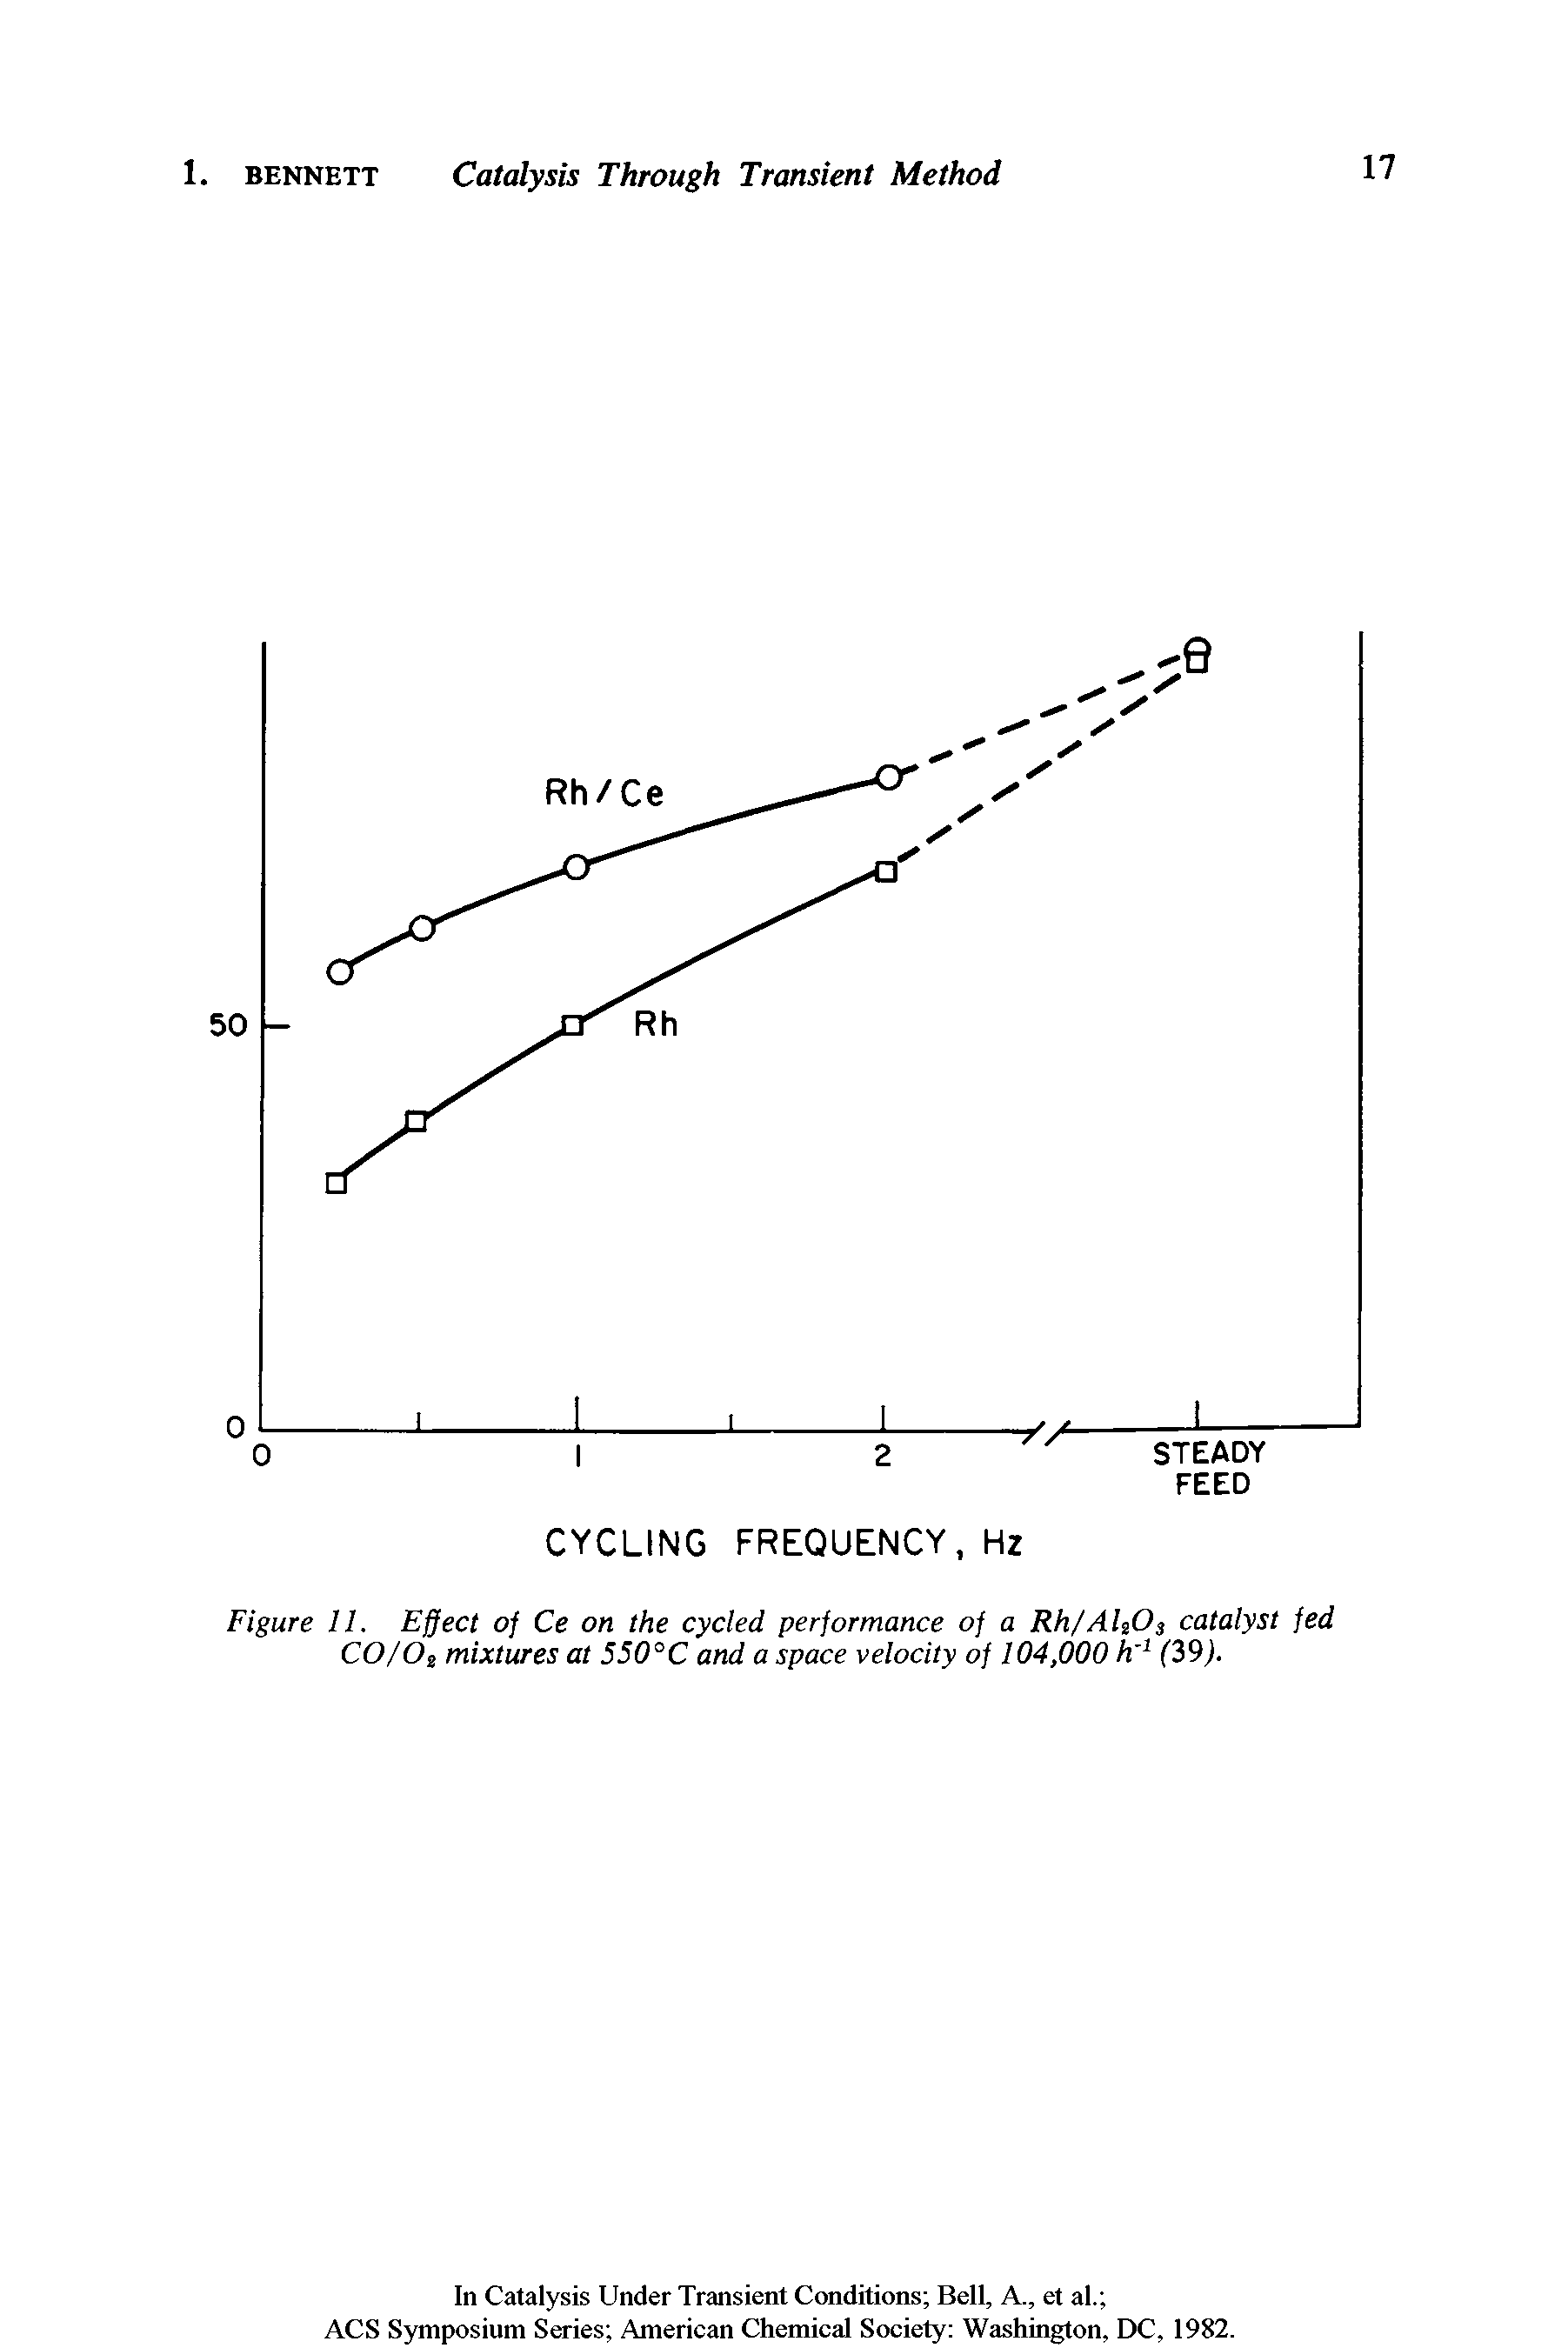 Figure 11. Effect of Ce on the cycled performance of a Rh/Als03 catalyst fed CO/Os mixtures at 550°C and a space velocity of 104,000 h 1 (39).